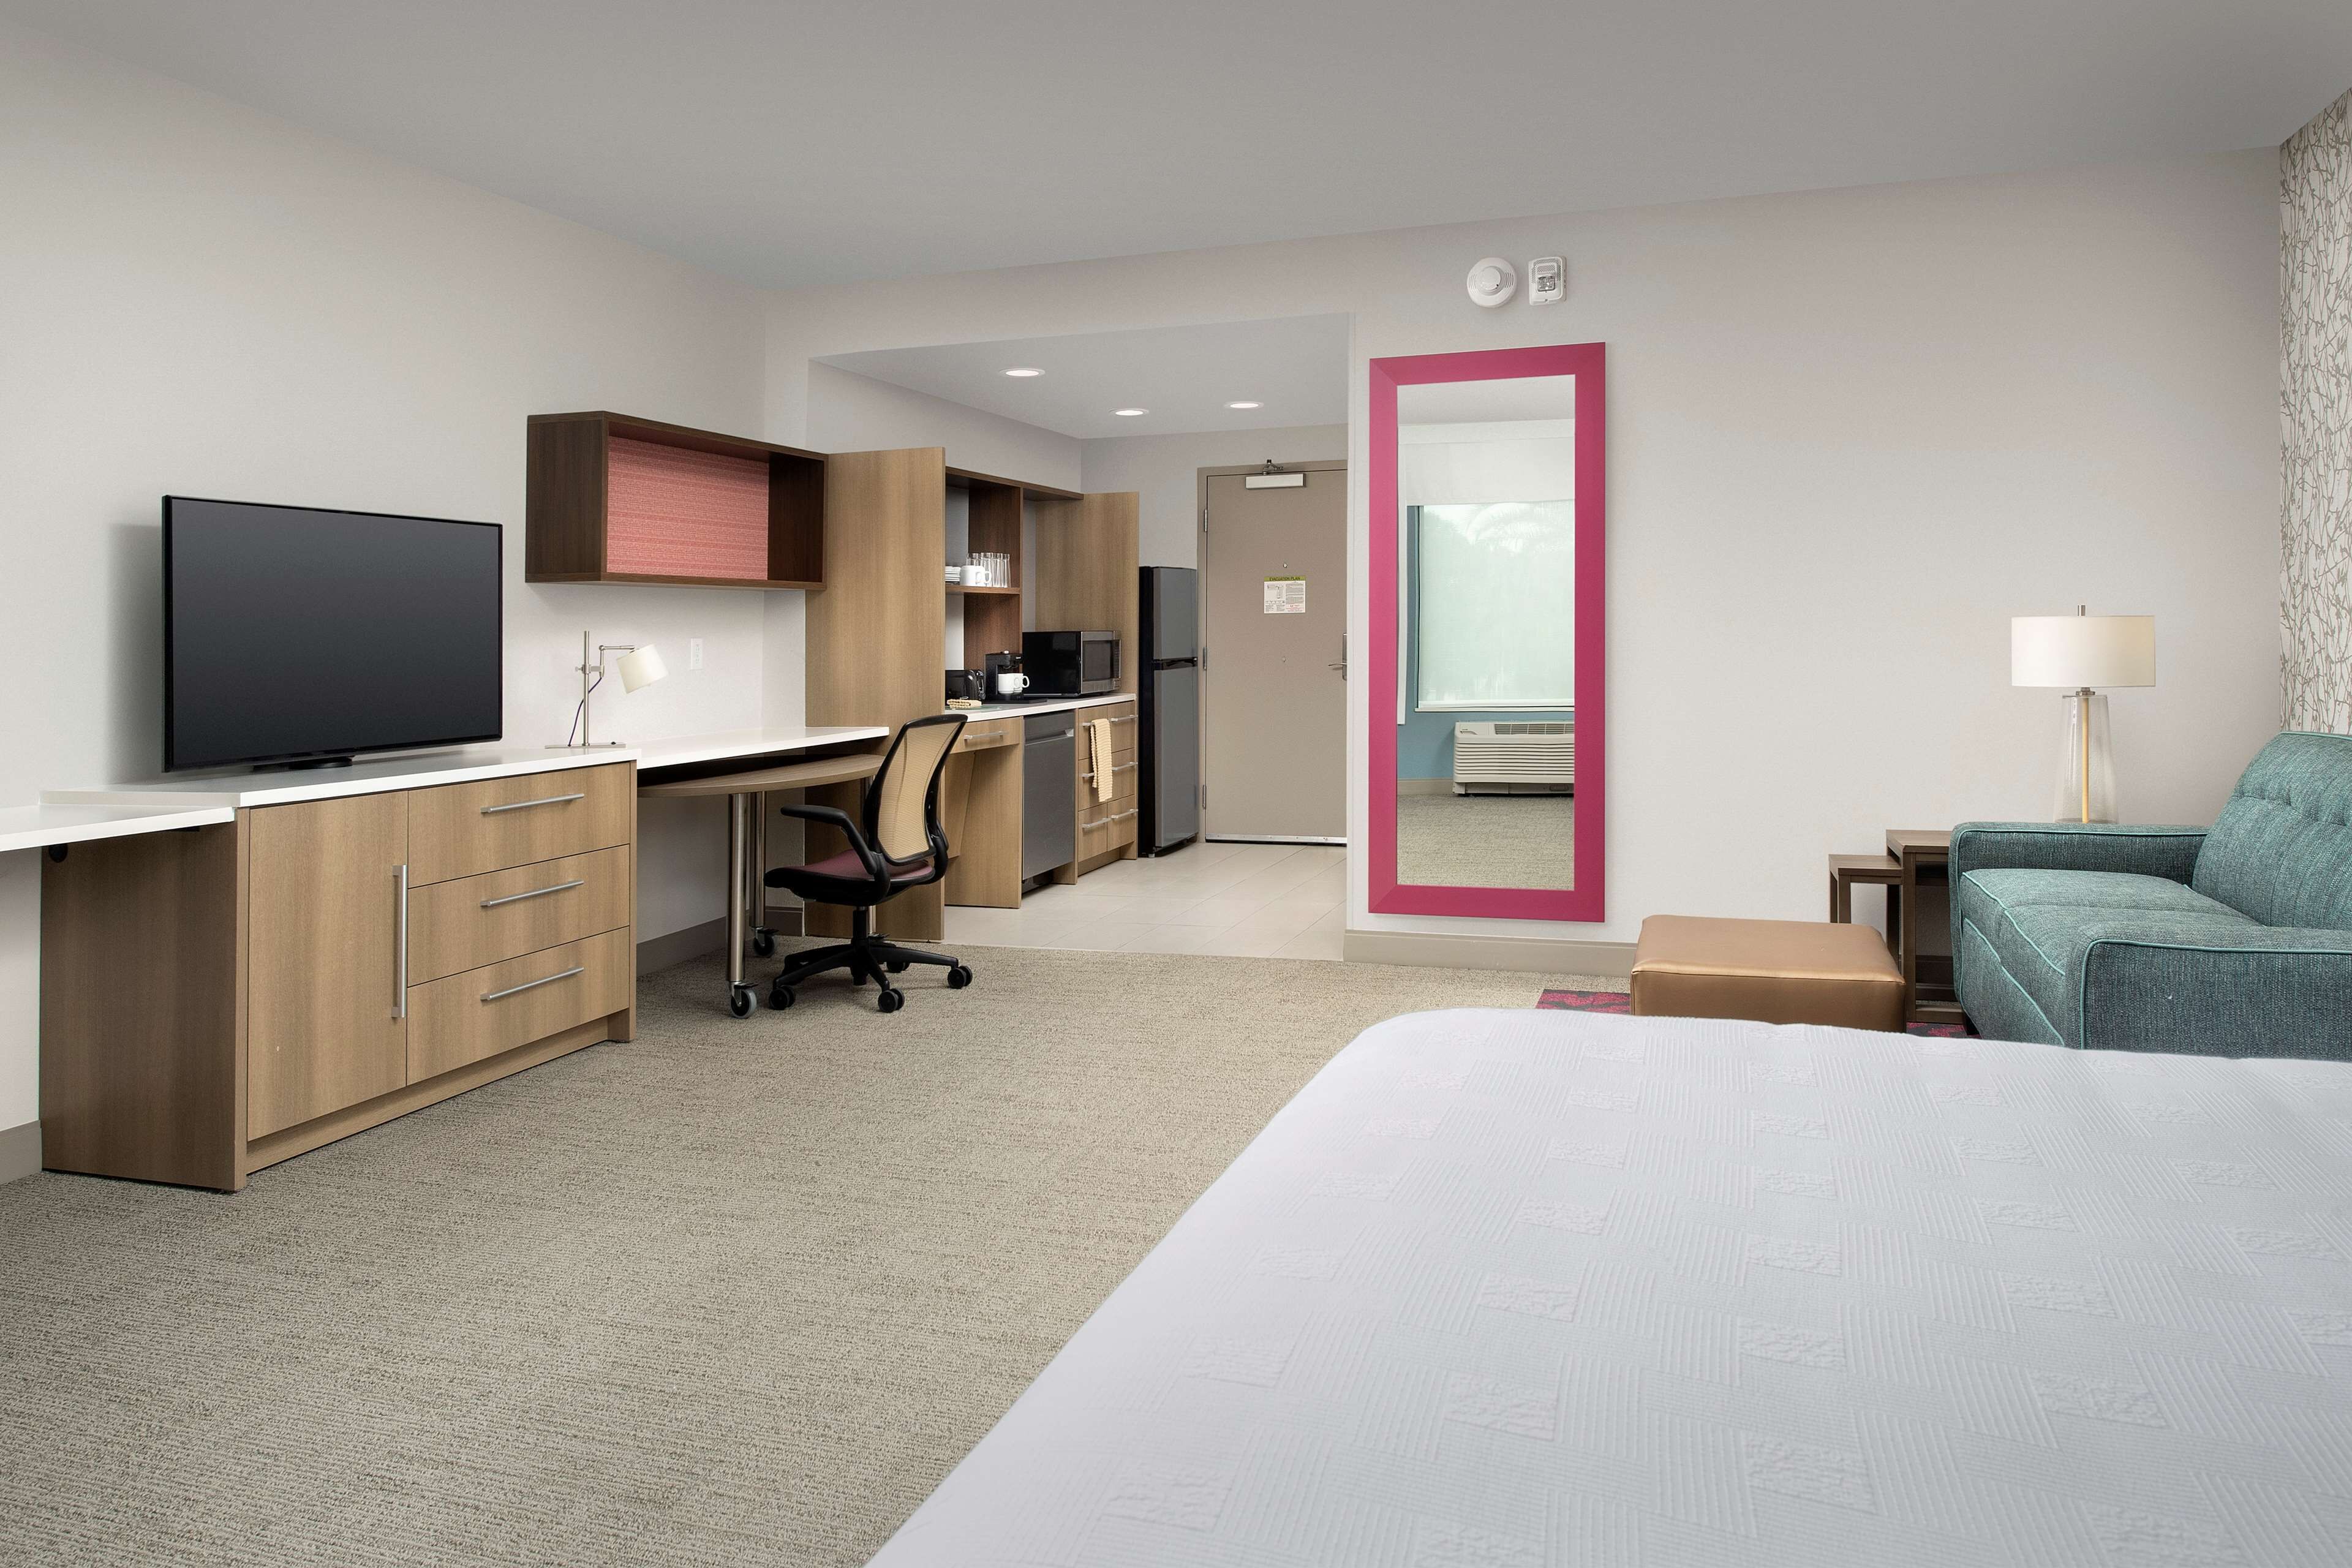 Home2 Suites by Hilton Orlando Downtown